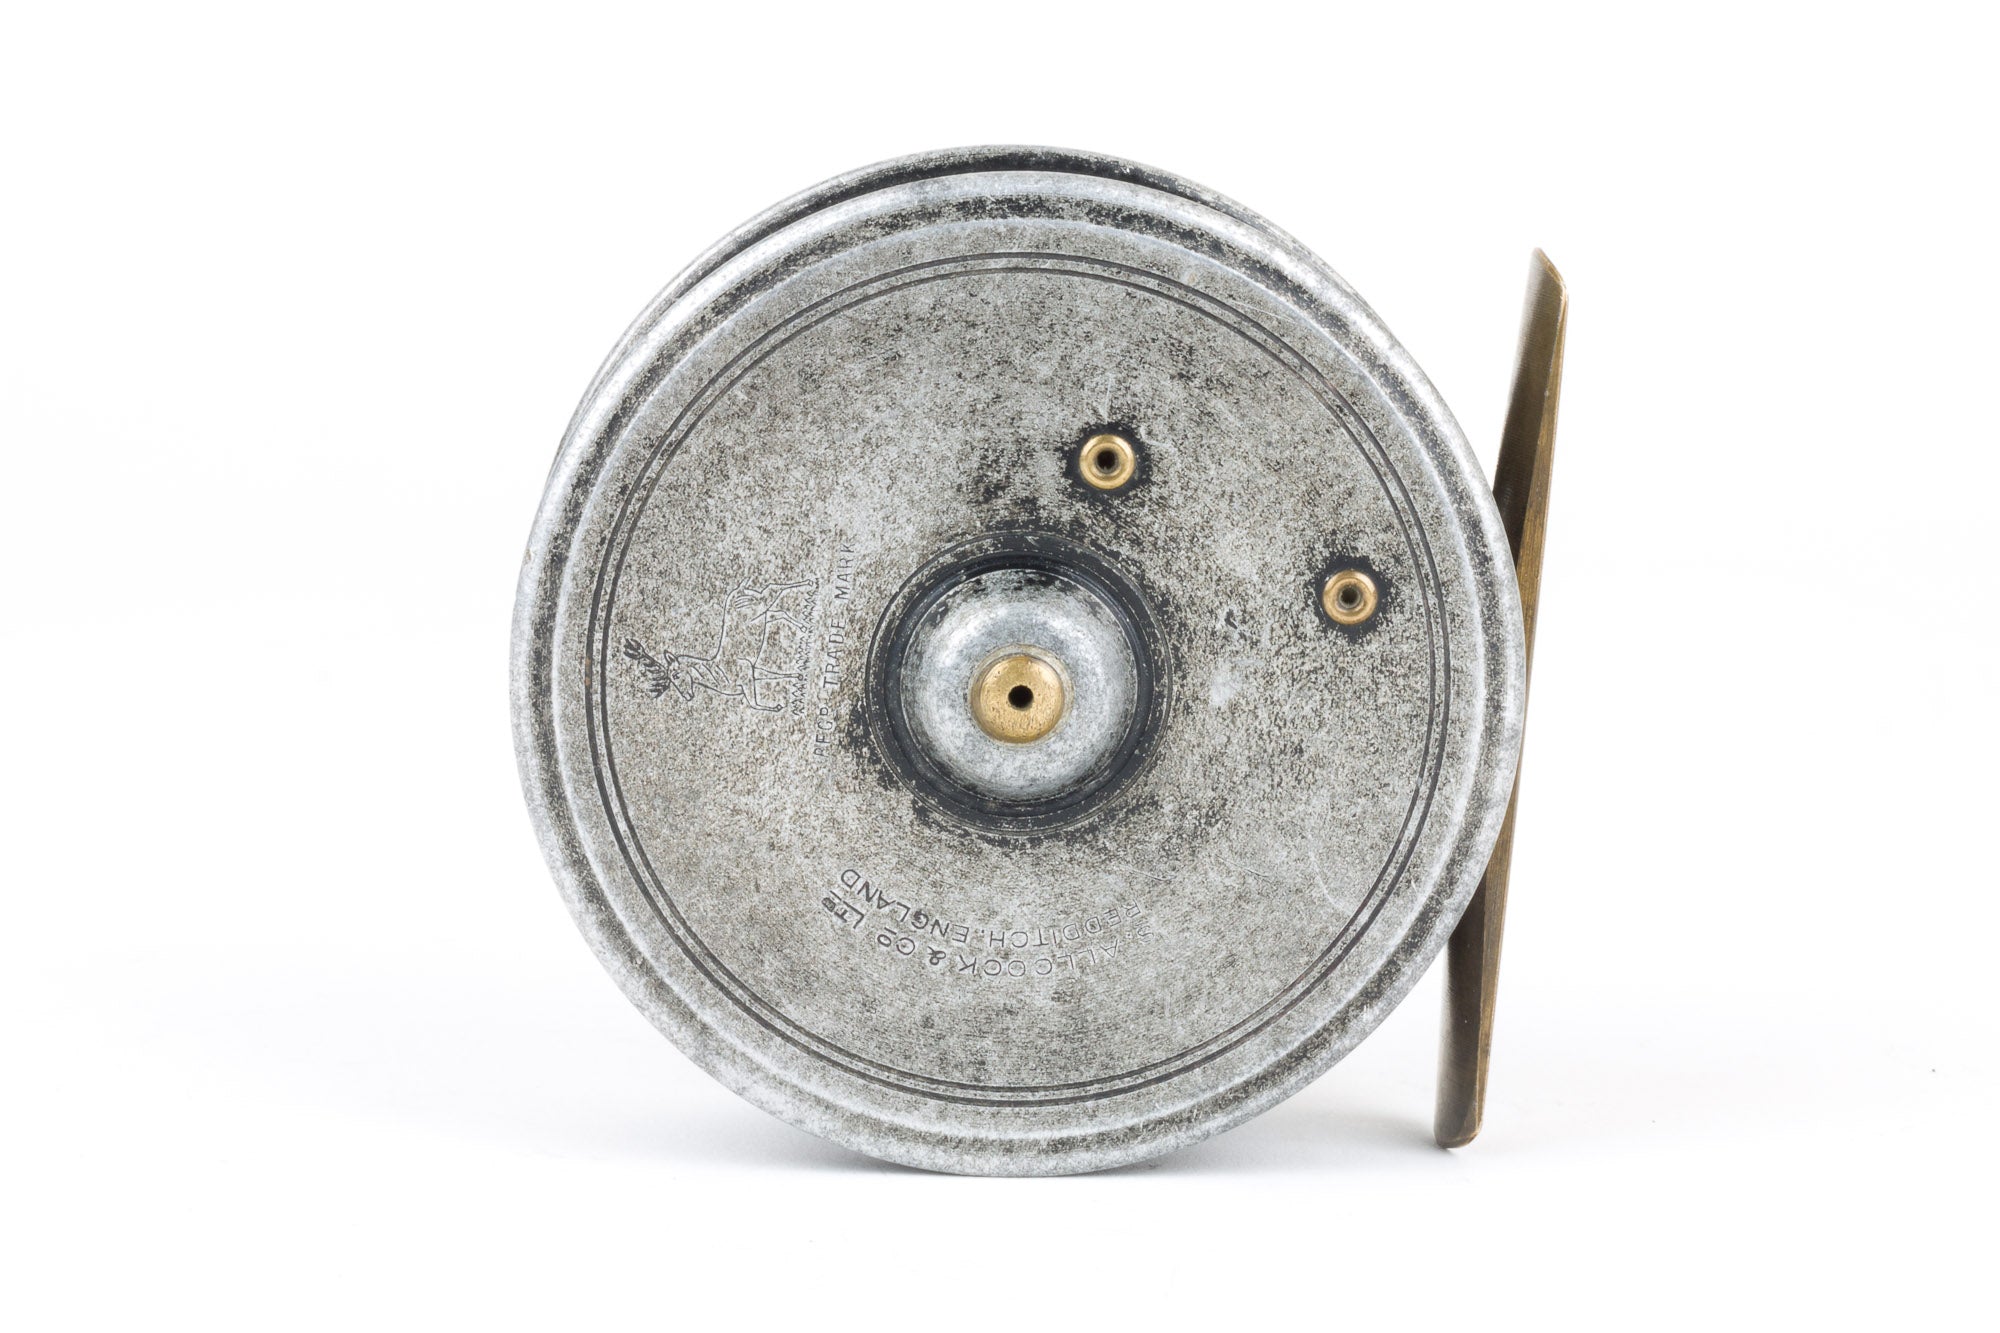 J.W. Young / Allcocks - 3 Fly Reel - Freestone Vintage Tackle